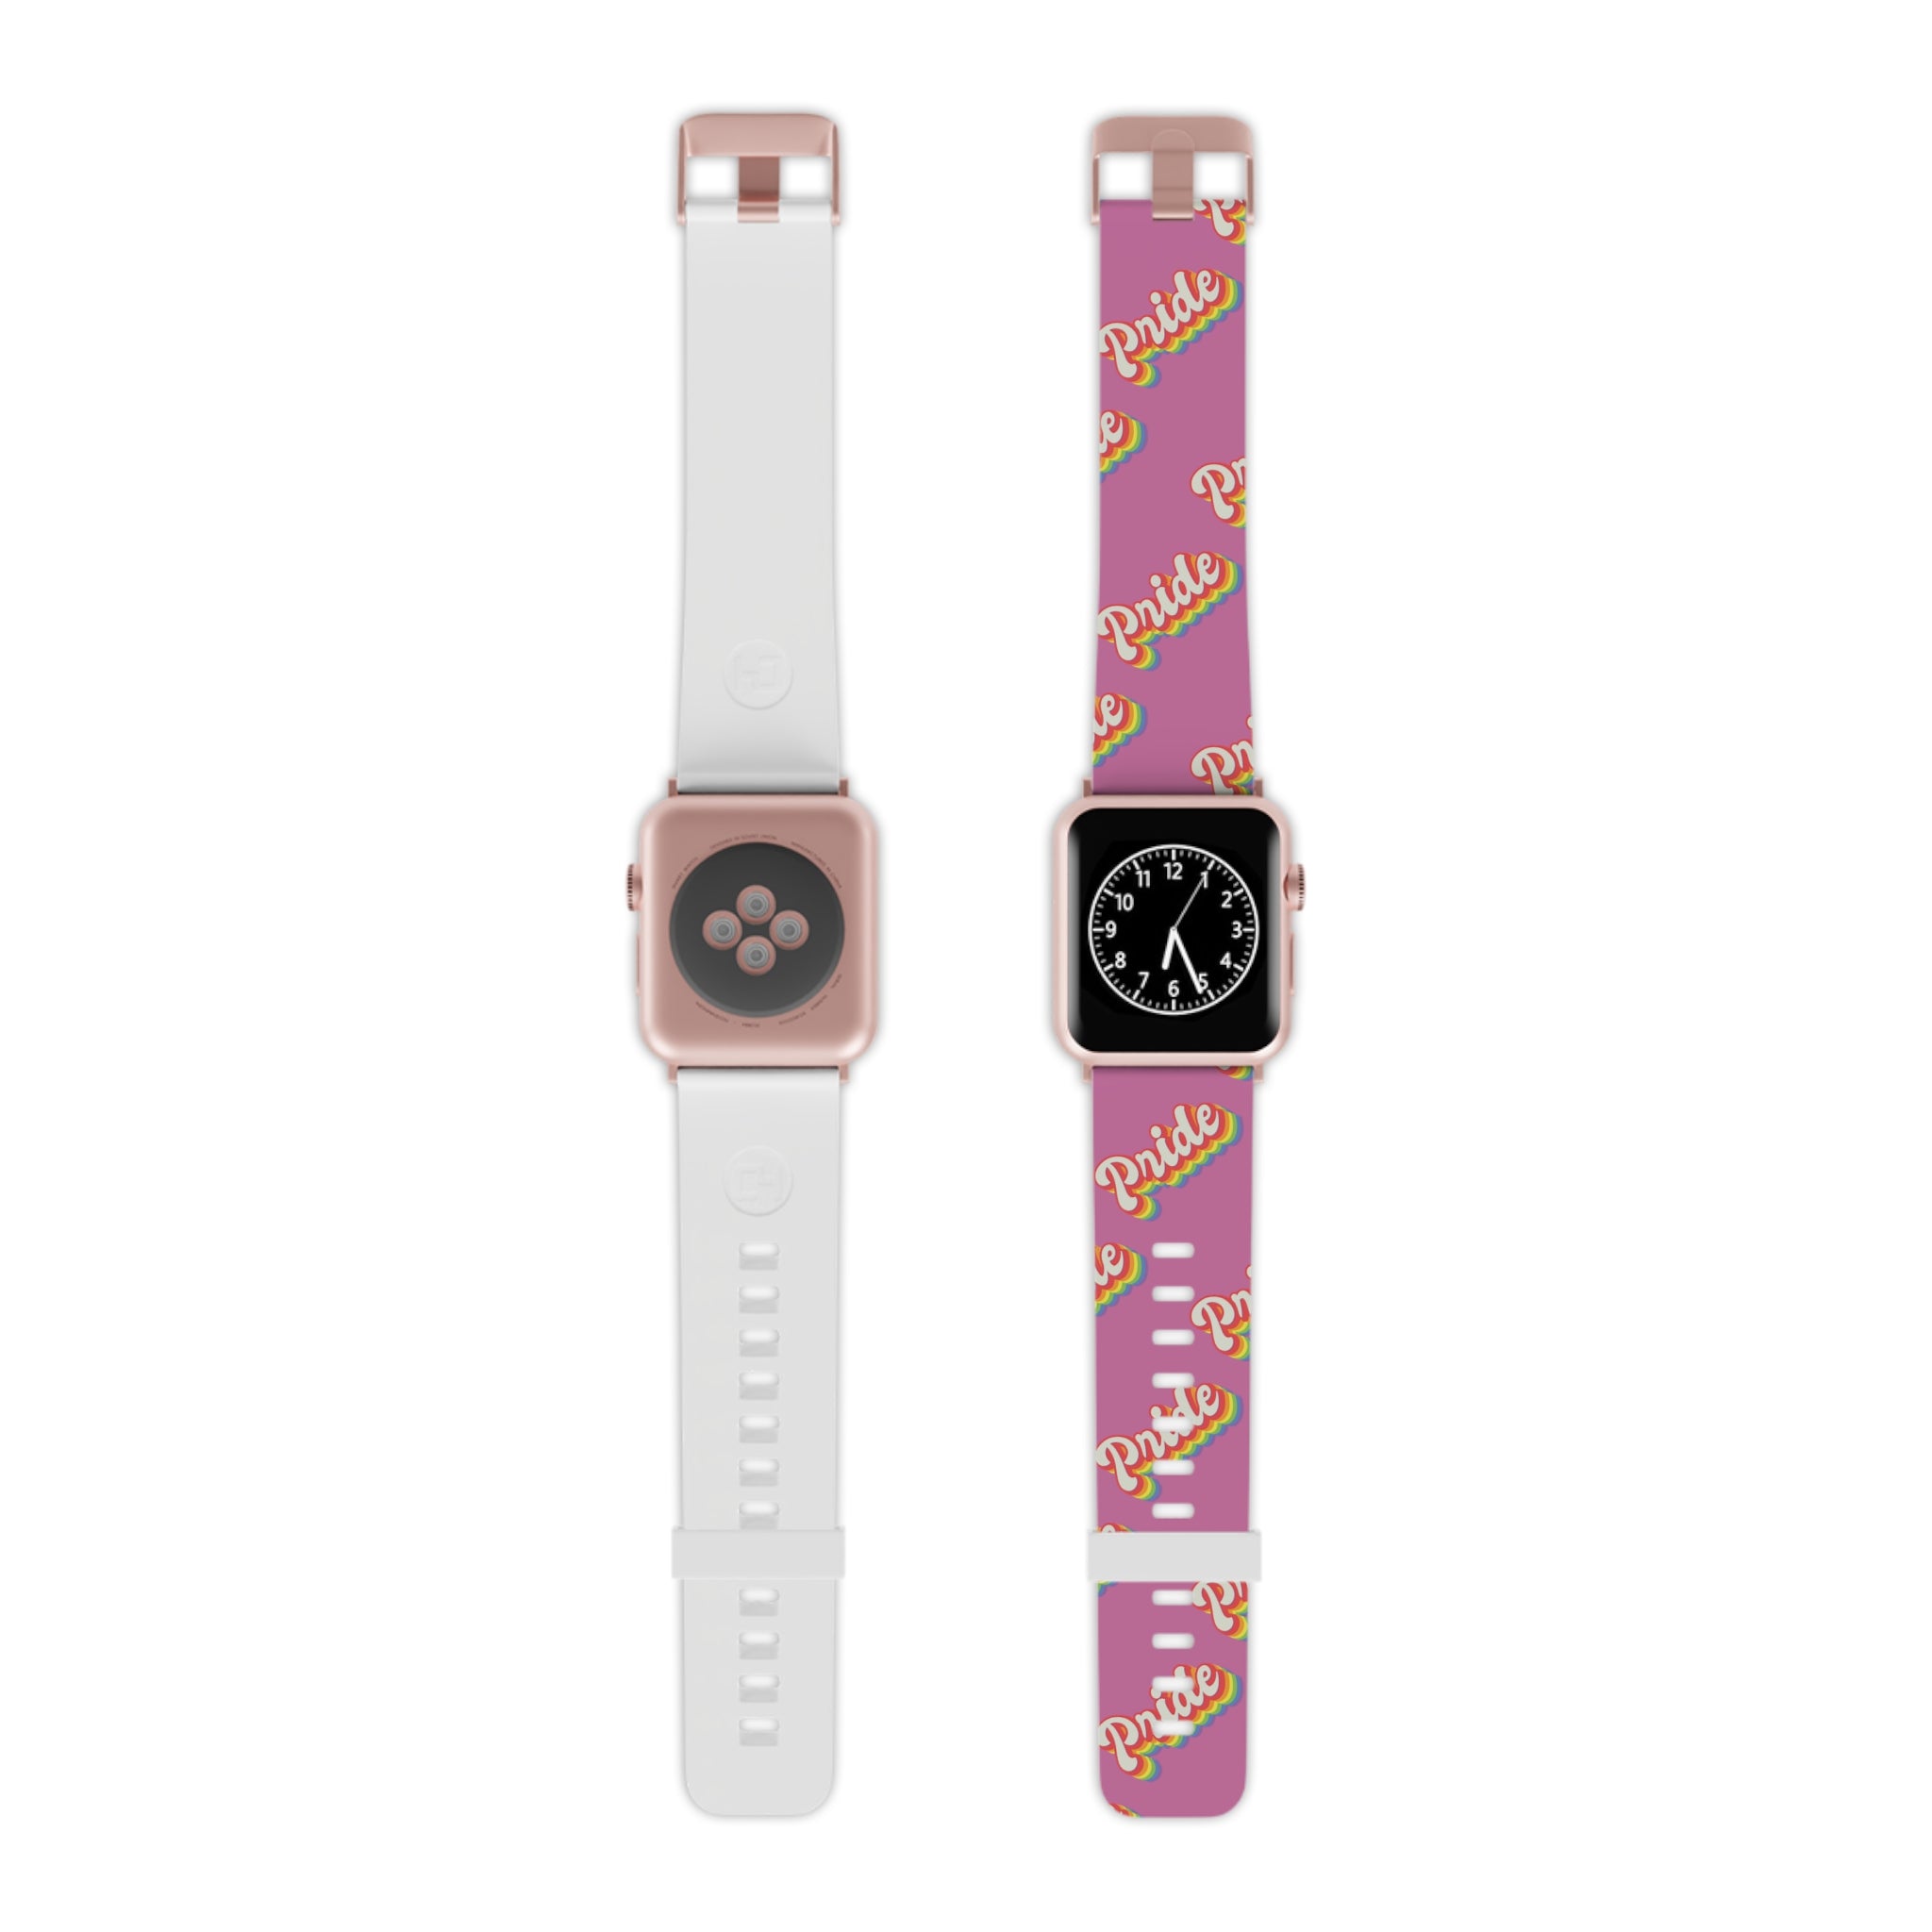 Two custom-printed pink and white Pride Band for Apple Watch T-Shirt, providing a fashionable alternative.